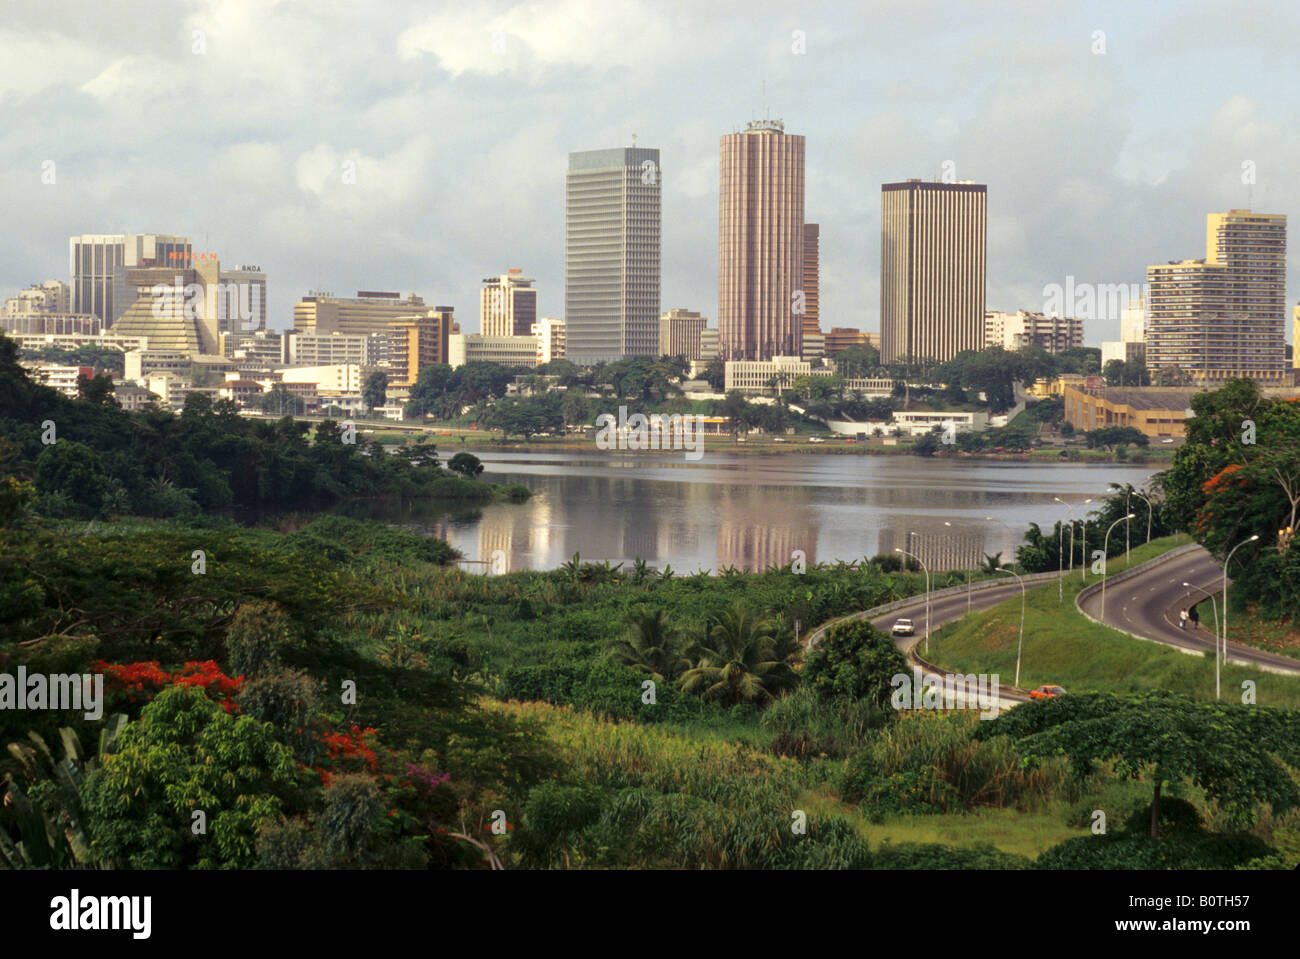 Abidjan, Cote d'Ivoire, Ivory Coast, West Africa. Skyline View of Plateau Commercial Area across Lagoon from Cocody Stock Photo